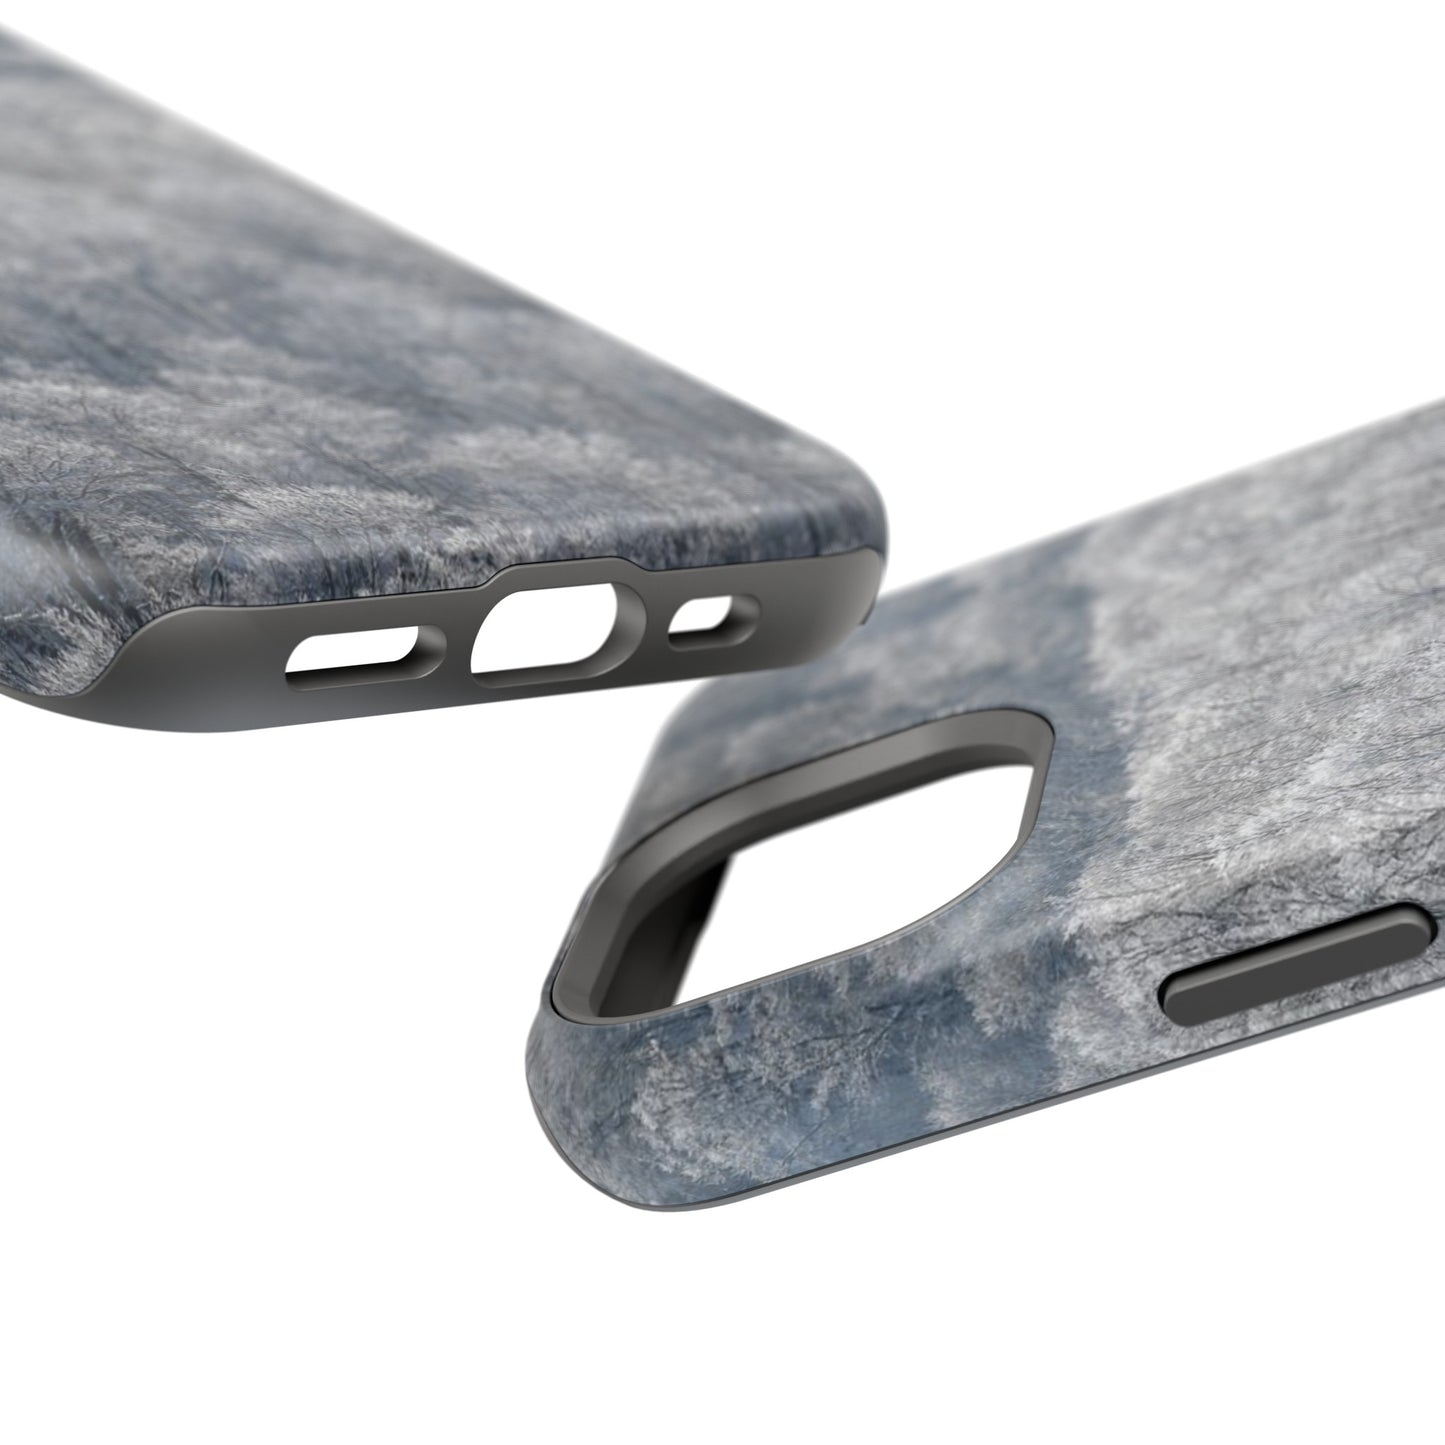 MagSafe Impact Resistant Phone Case - Frozen trees